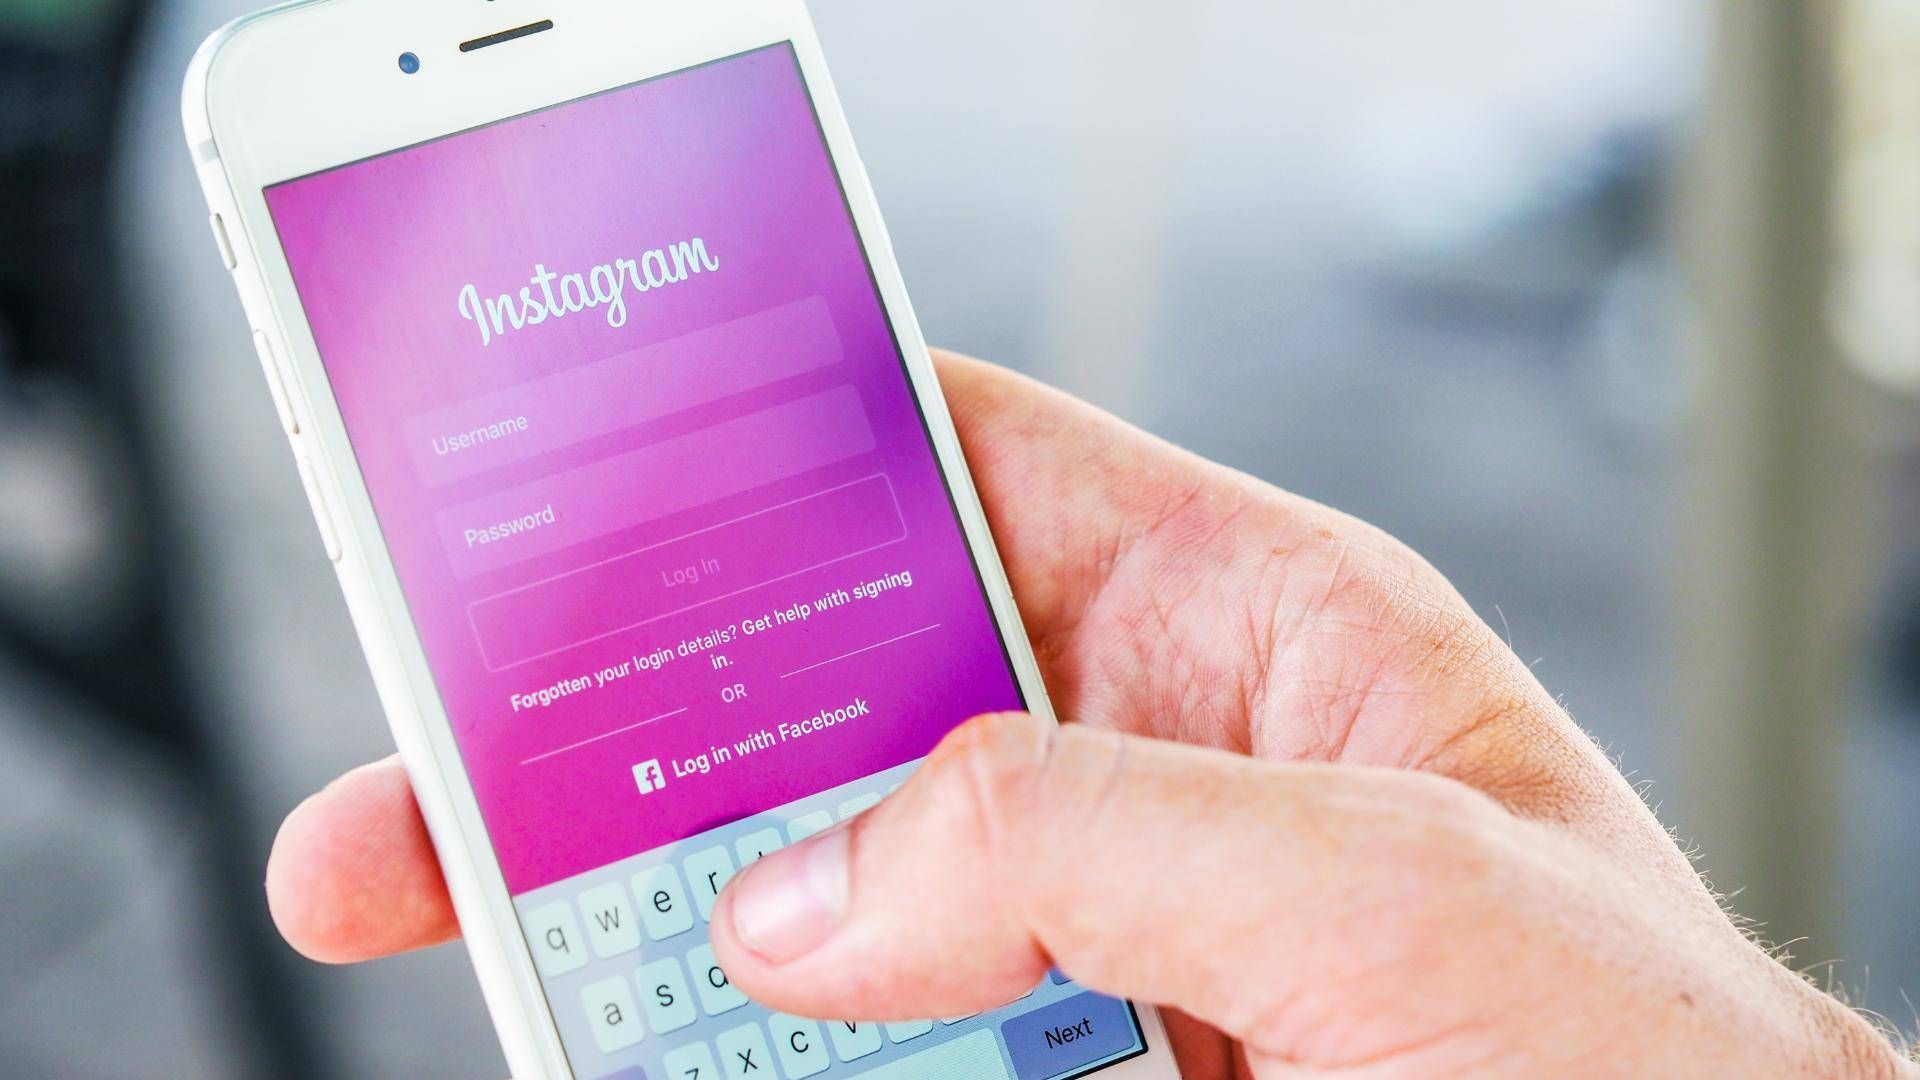 Should you raise your property’s profile on Instagram?